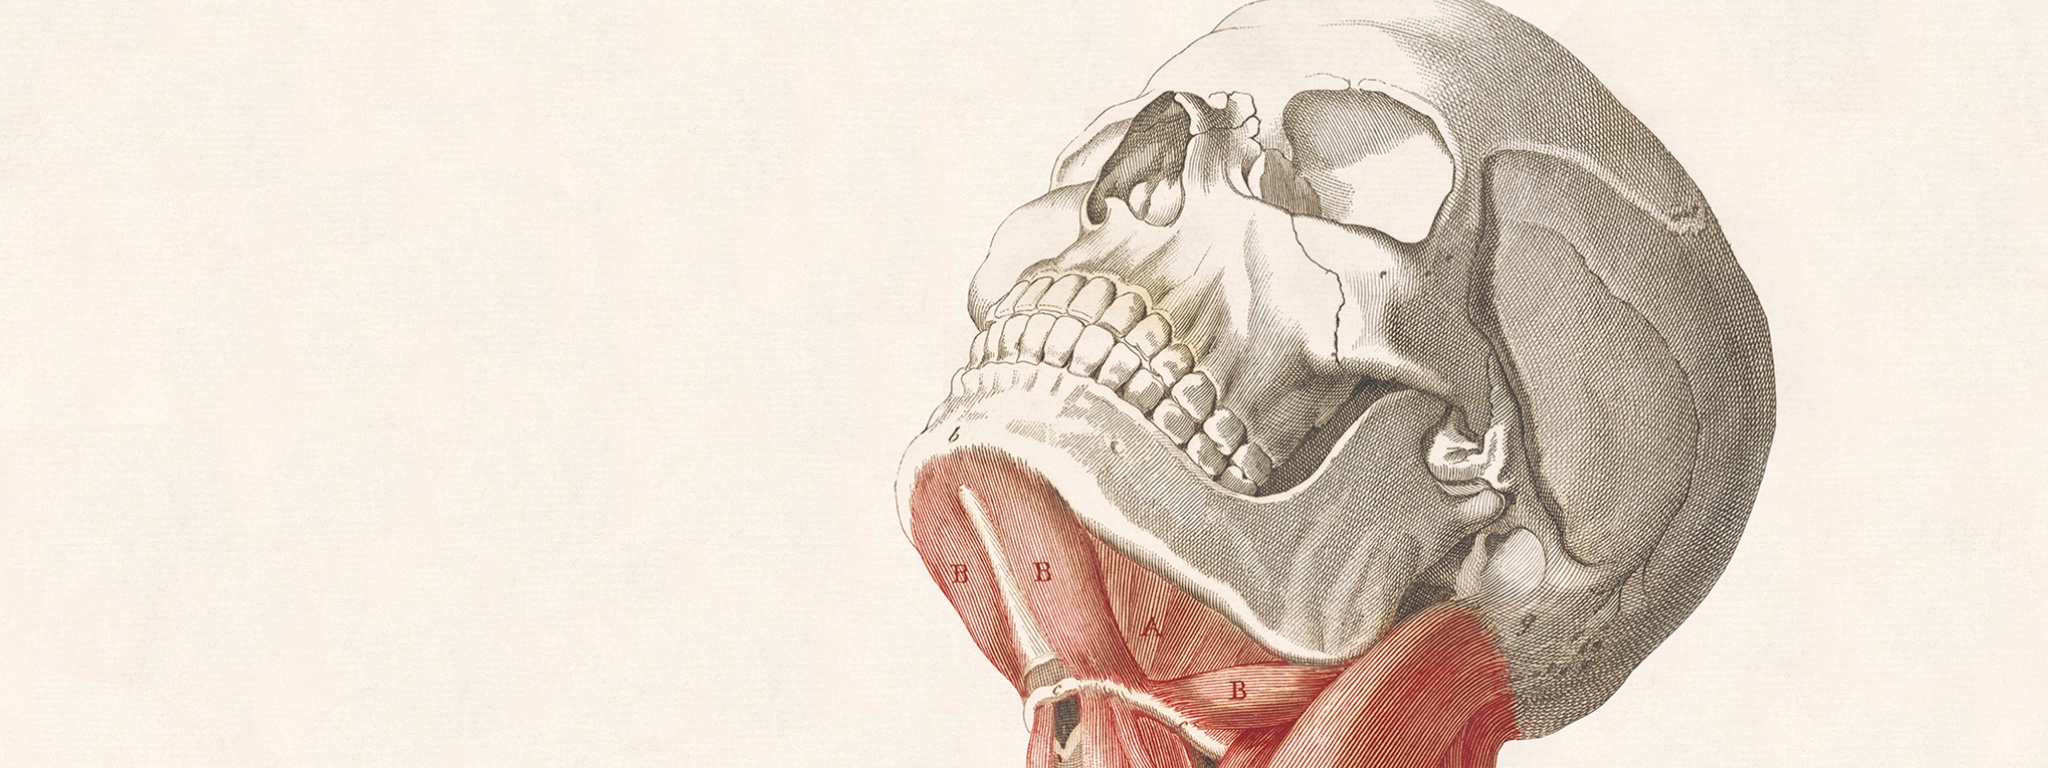 http://www.getty.edu/research/exhibitions_events/exhibitions/anatomy/images/banner.jpg